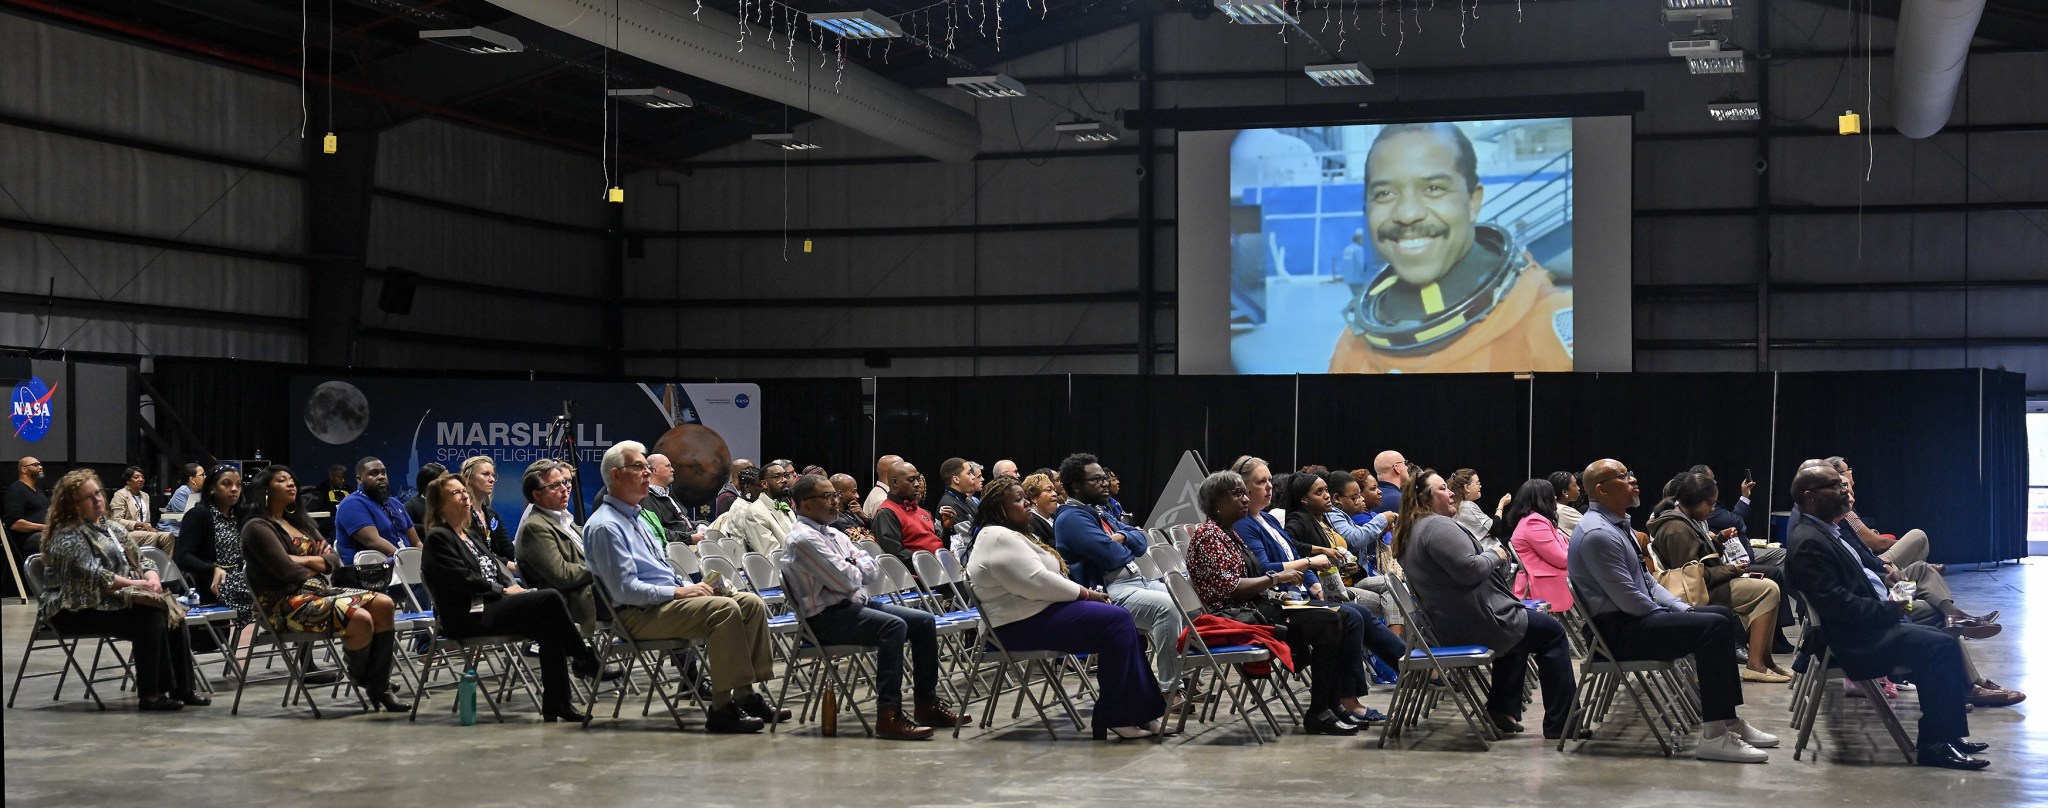 Attendees at BEAM’s Black History Month observance event Feb. 27 watch the NASA documentary “The Color of Space.” On screen is former NASA astronaut Bernard A. Harris Jr., who flew during the Space Shuttle Program. He has logged 438 hours in space.